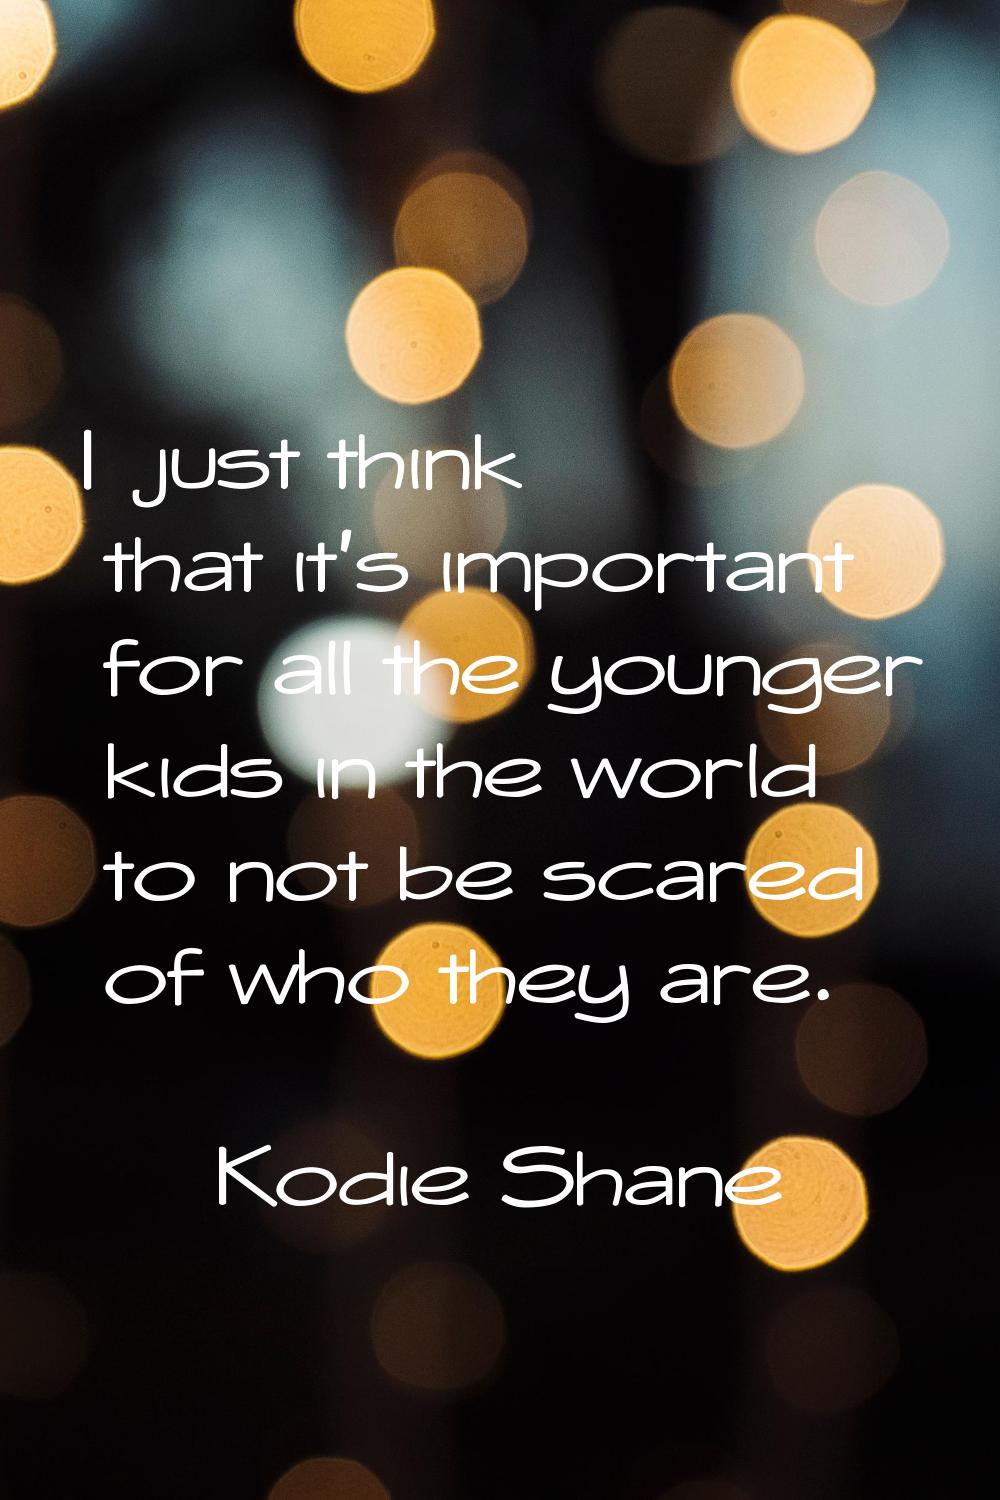 I just think that it's important for all the younger kids in the world to not be scared of who they